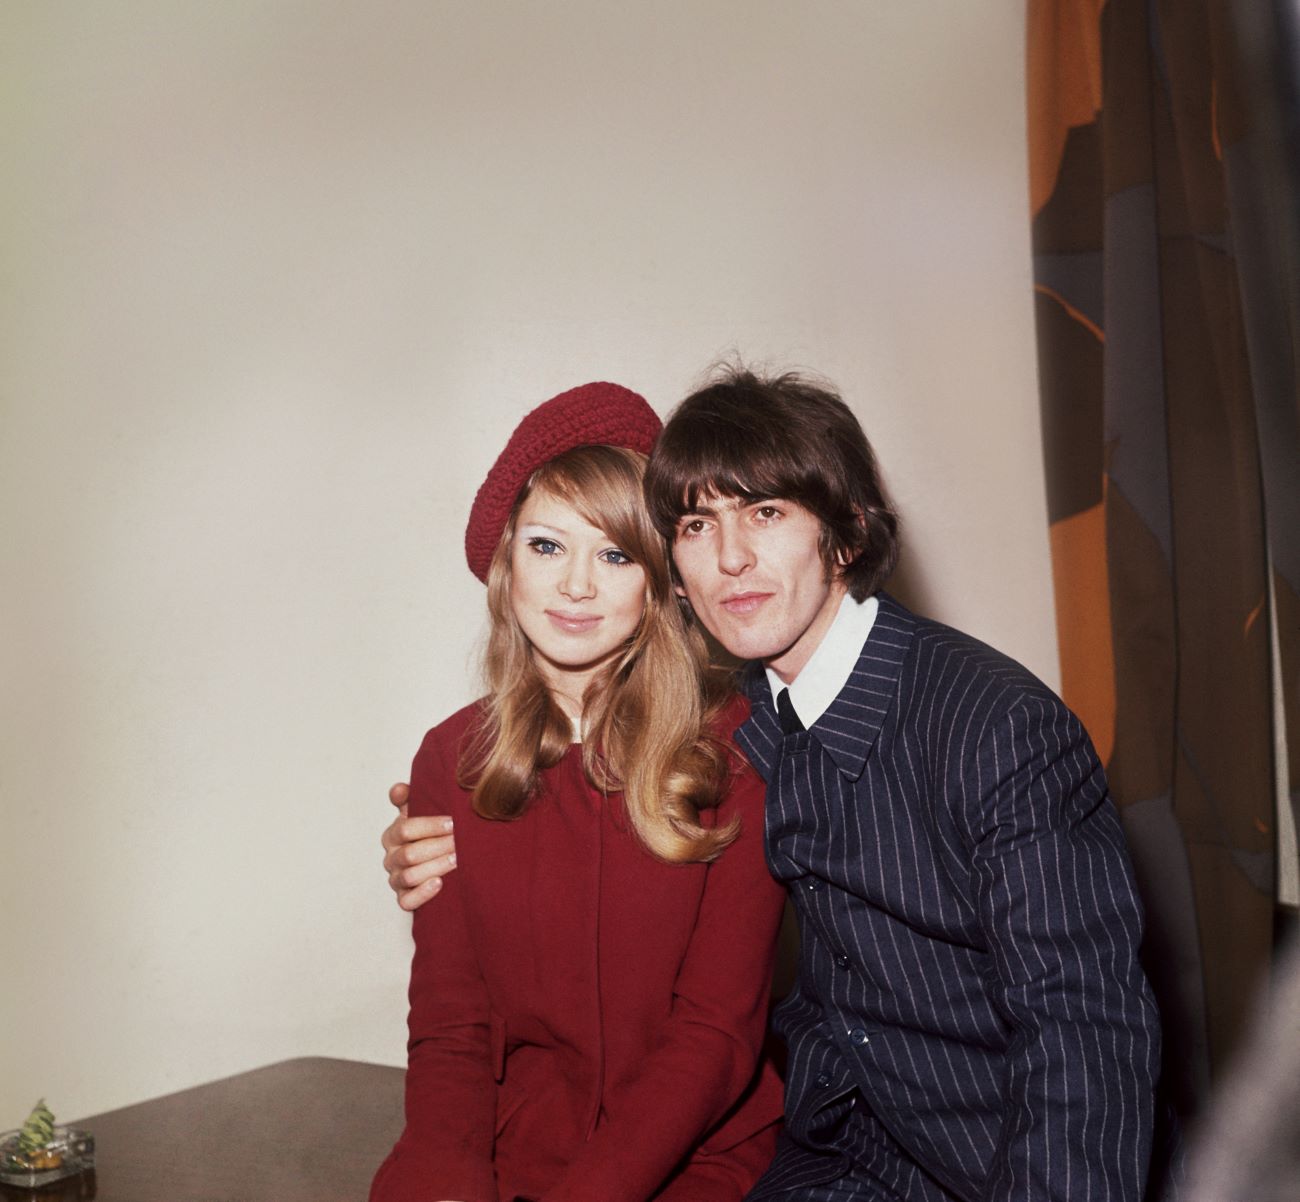 George Harrison holds his arm around his first wife Pattie Boyd's shoulders. She wears a knit hat.